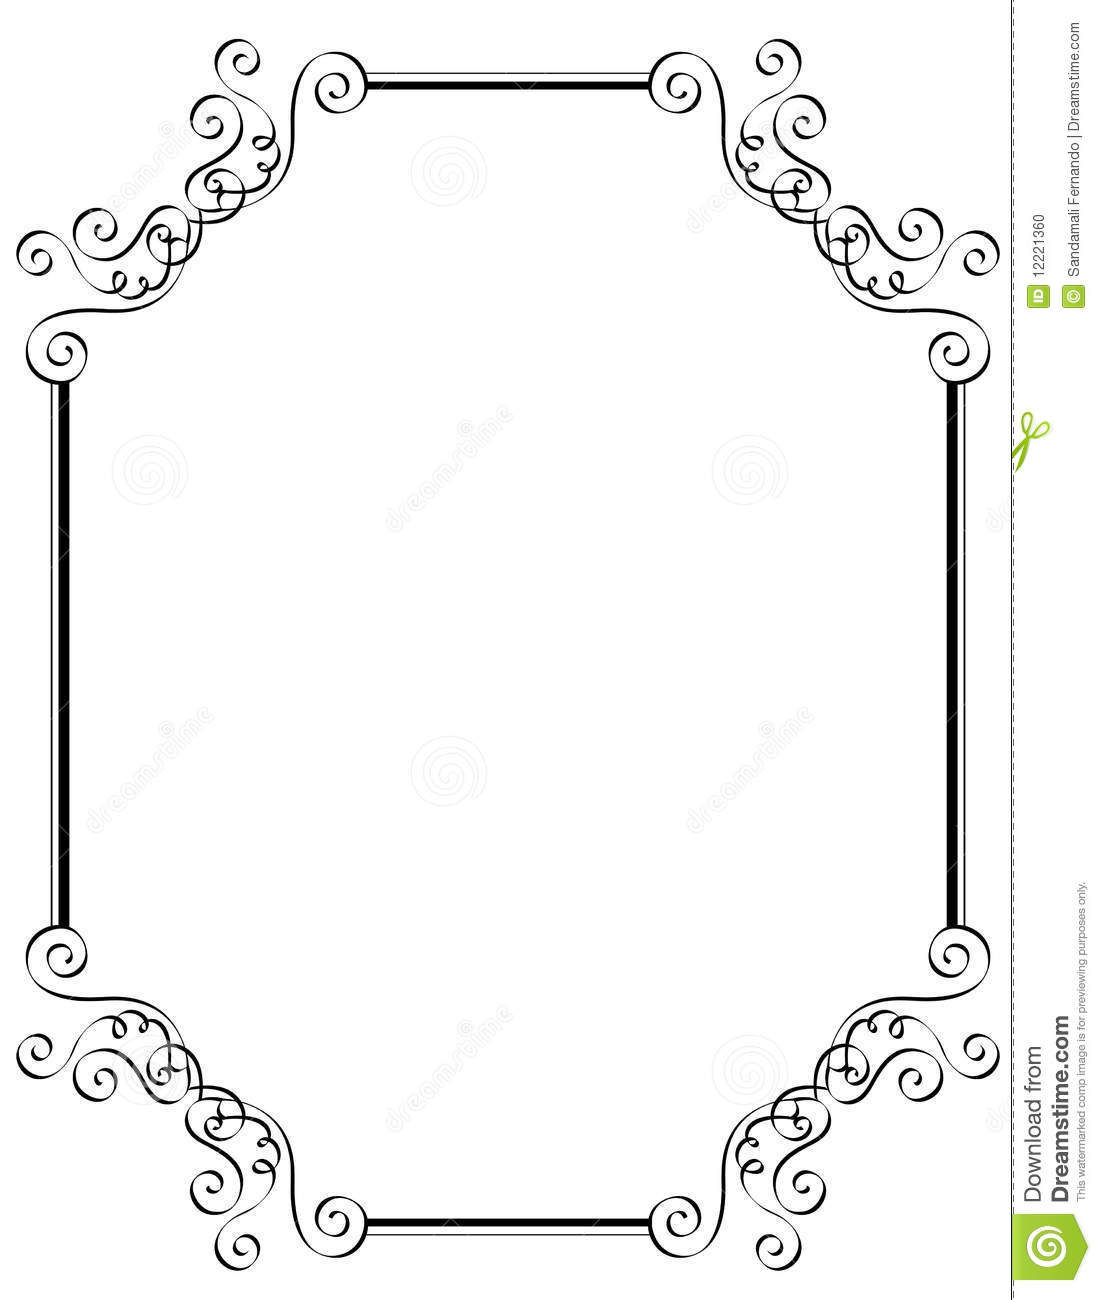 free-invitation-borders-download-free-invitation-borders-png-images